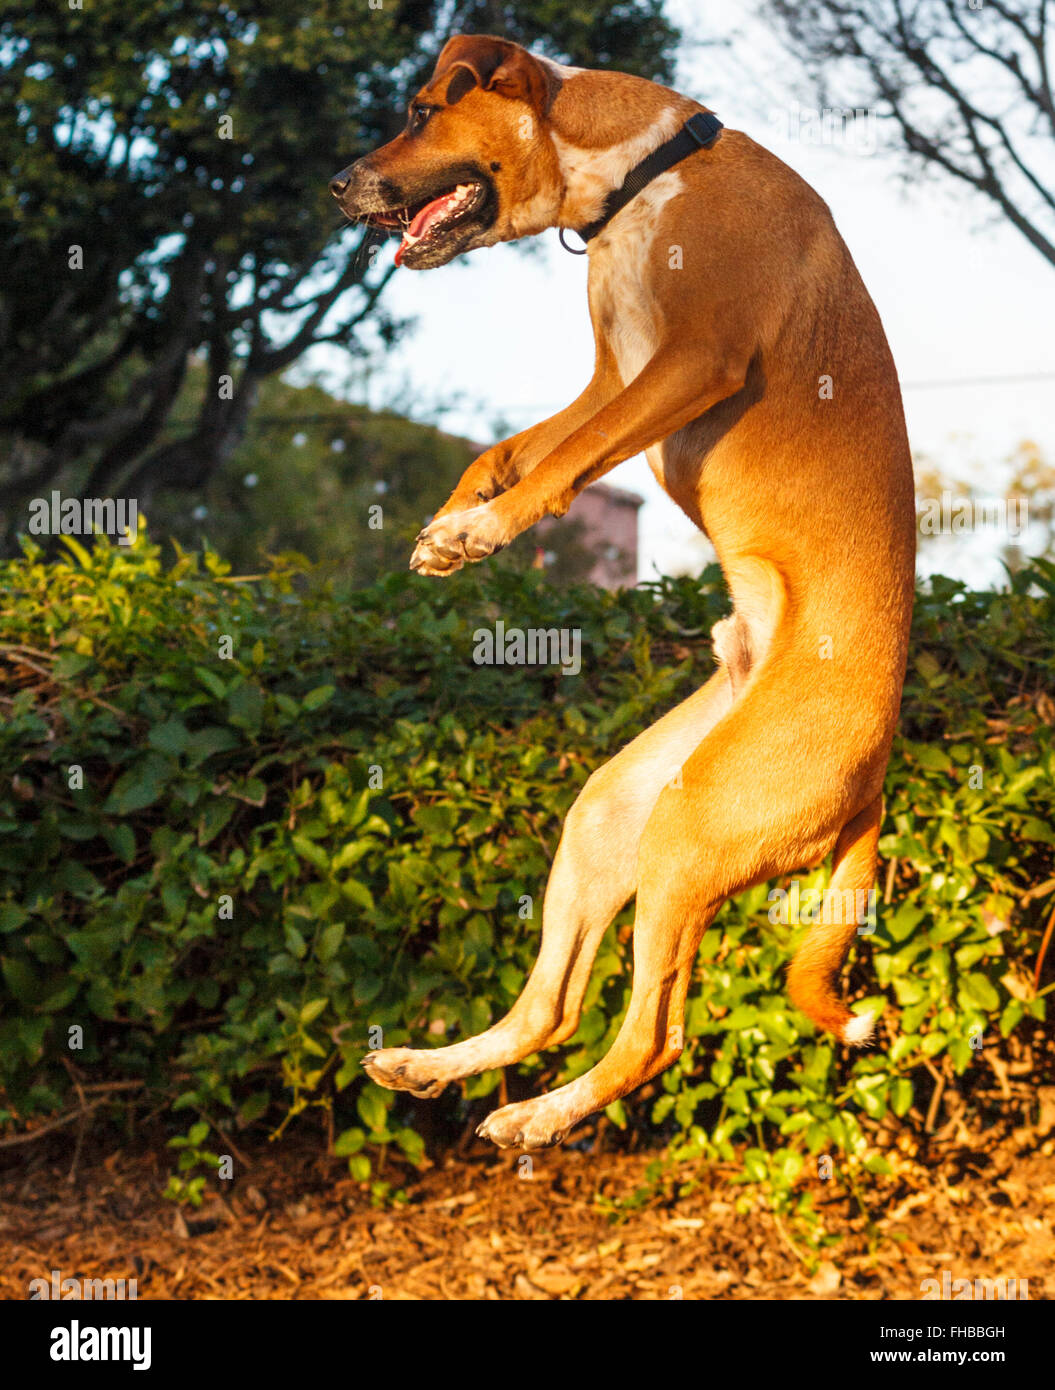 Australian cattle dog mix jumps high in the air Stock Photo